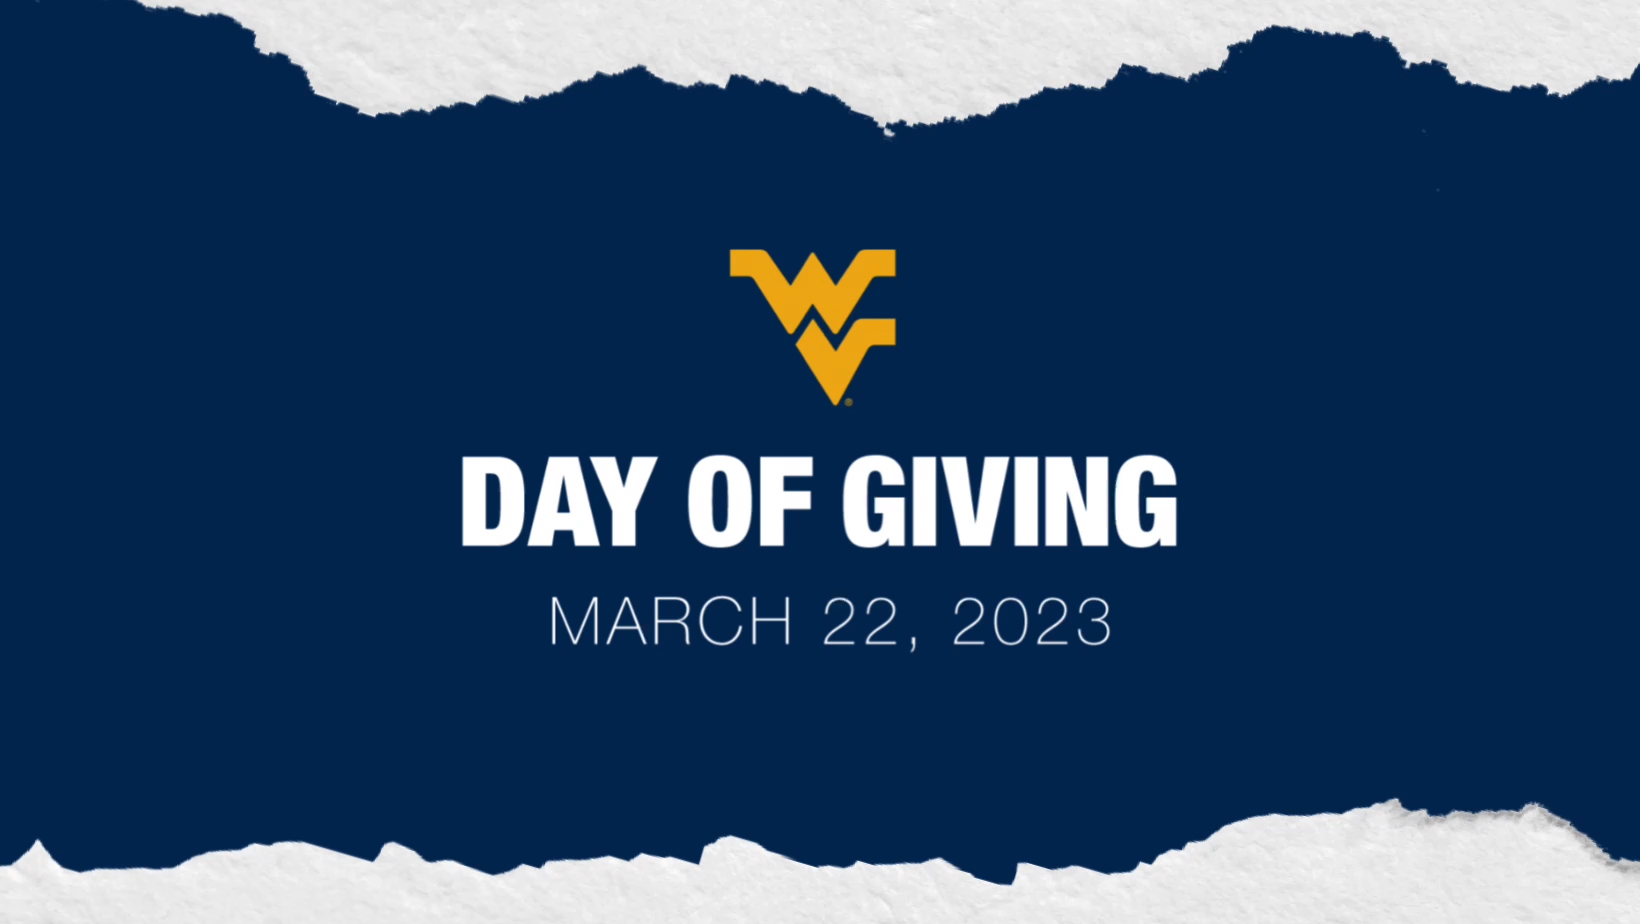 WVU Day of Giving, March 22, 2023